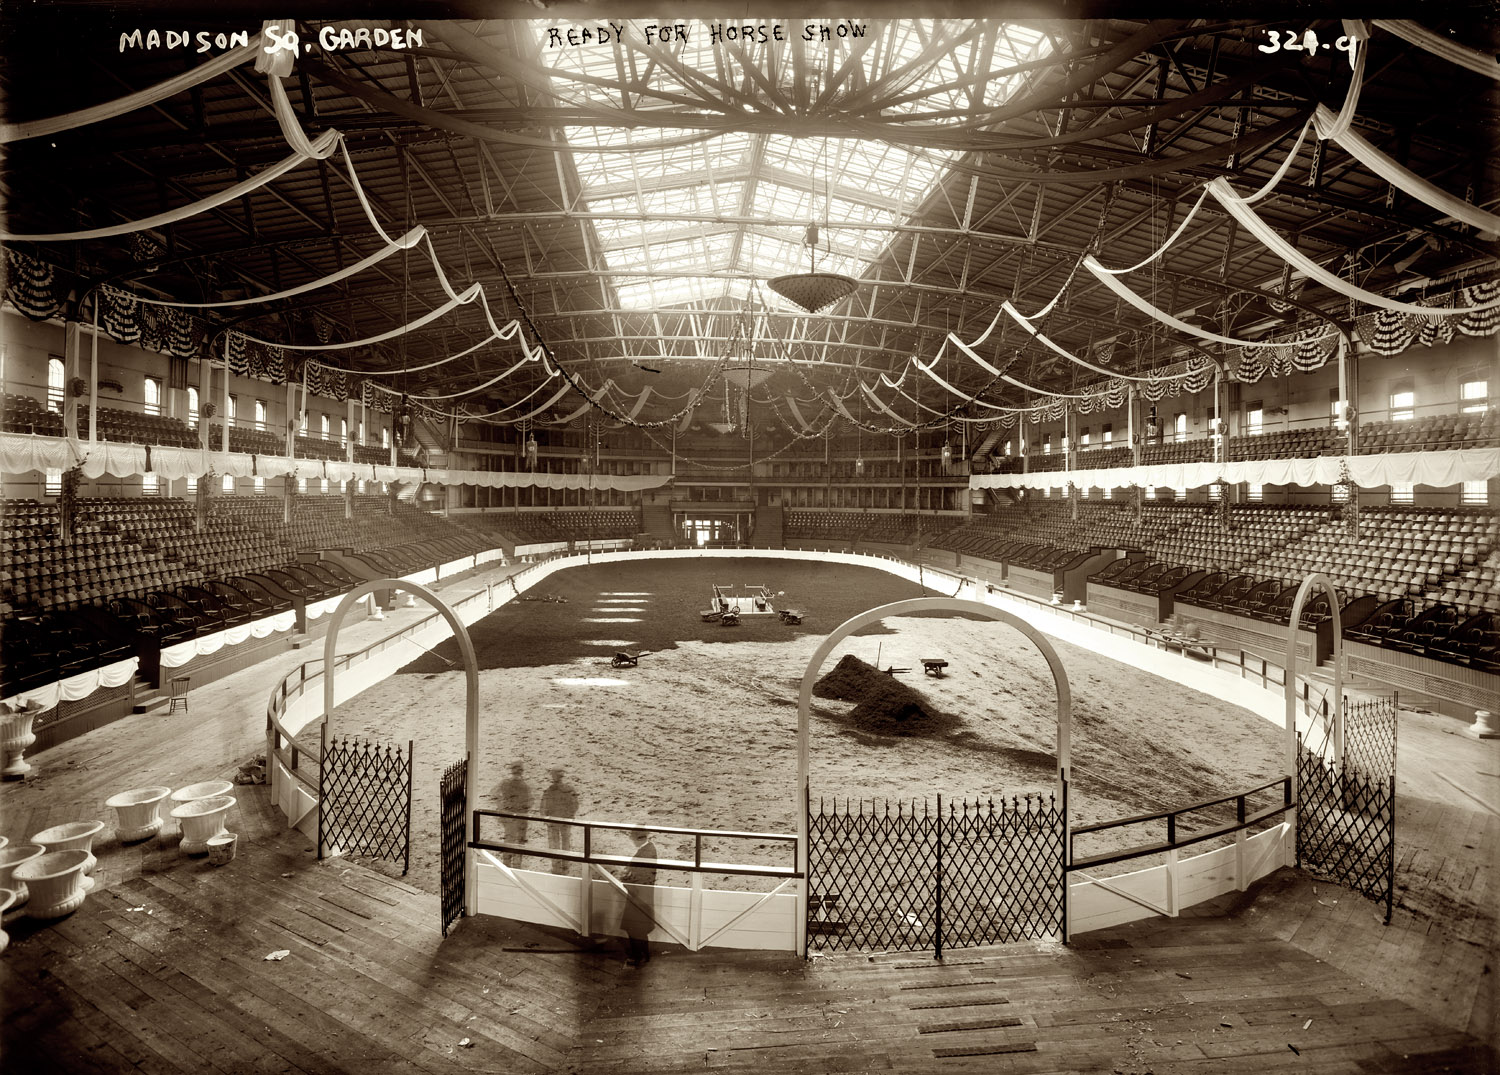 New York, 1908. "Madison Square Garden ready for horse show." 8x10 glass negative, George Grantham Bain Collection. View full size.